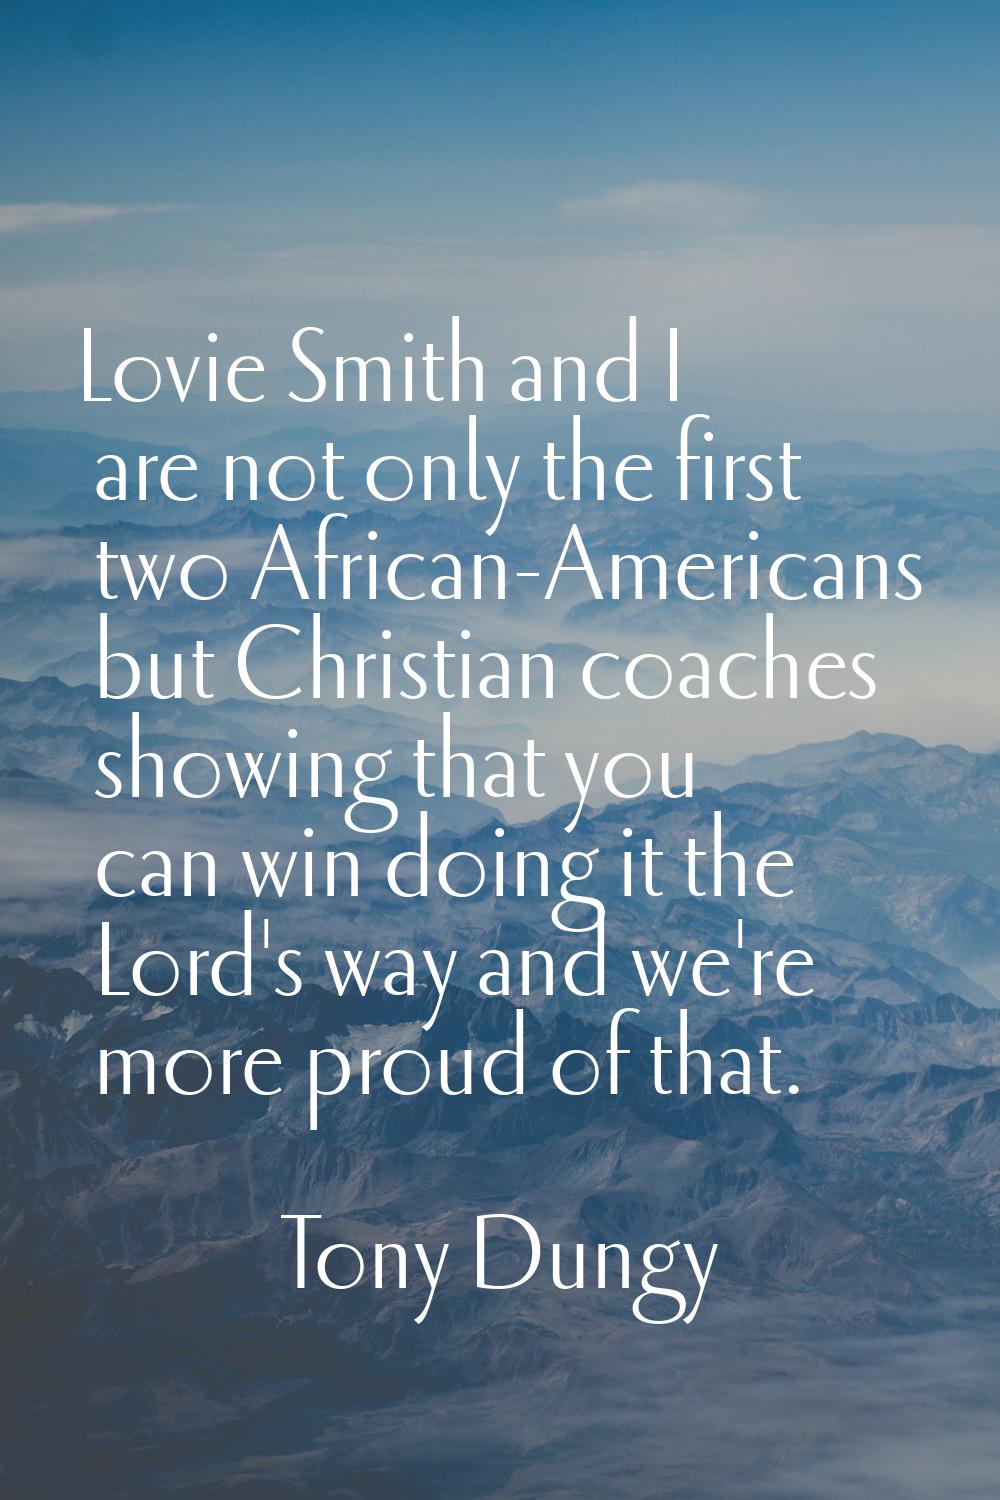 Lovie Smith and I are not only the first two African-Americans but Christian coaches showing that y